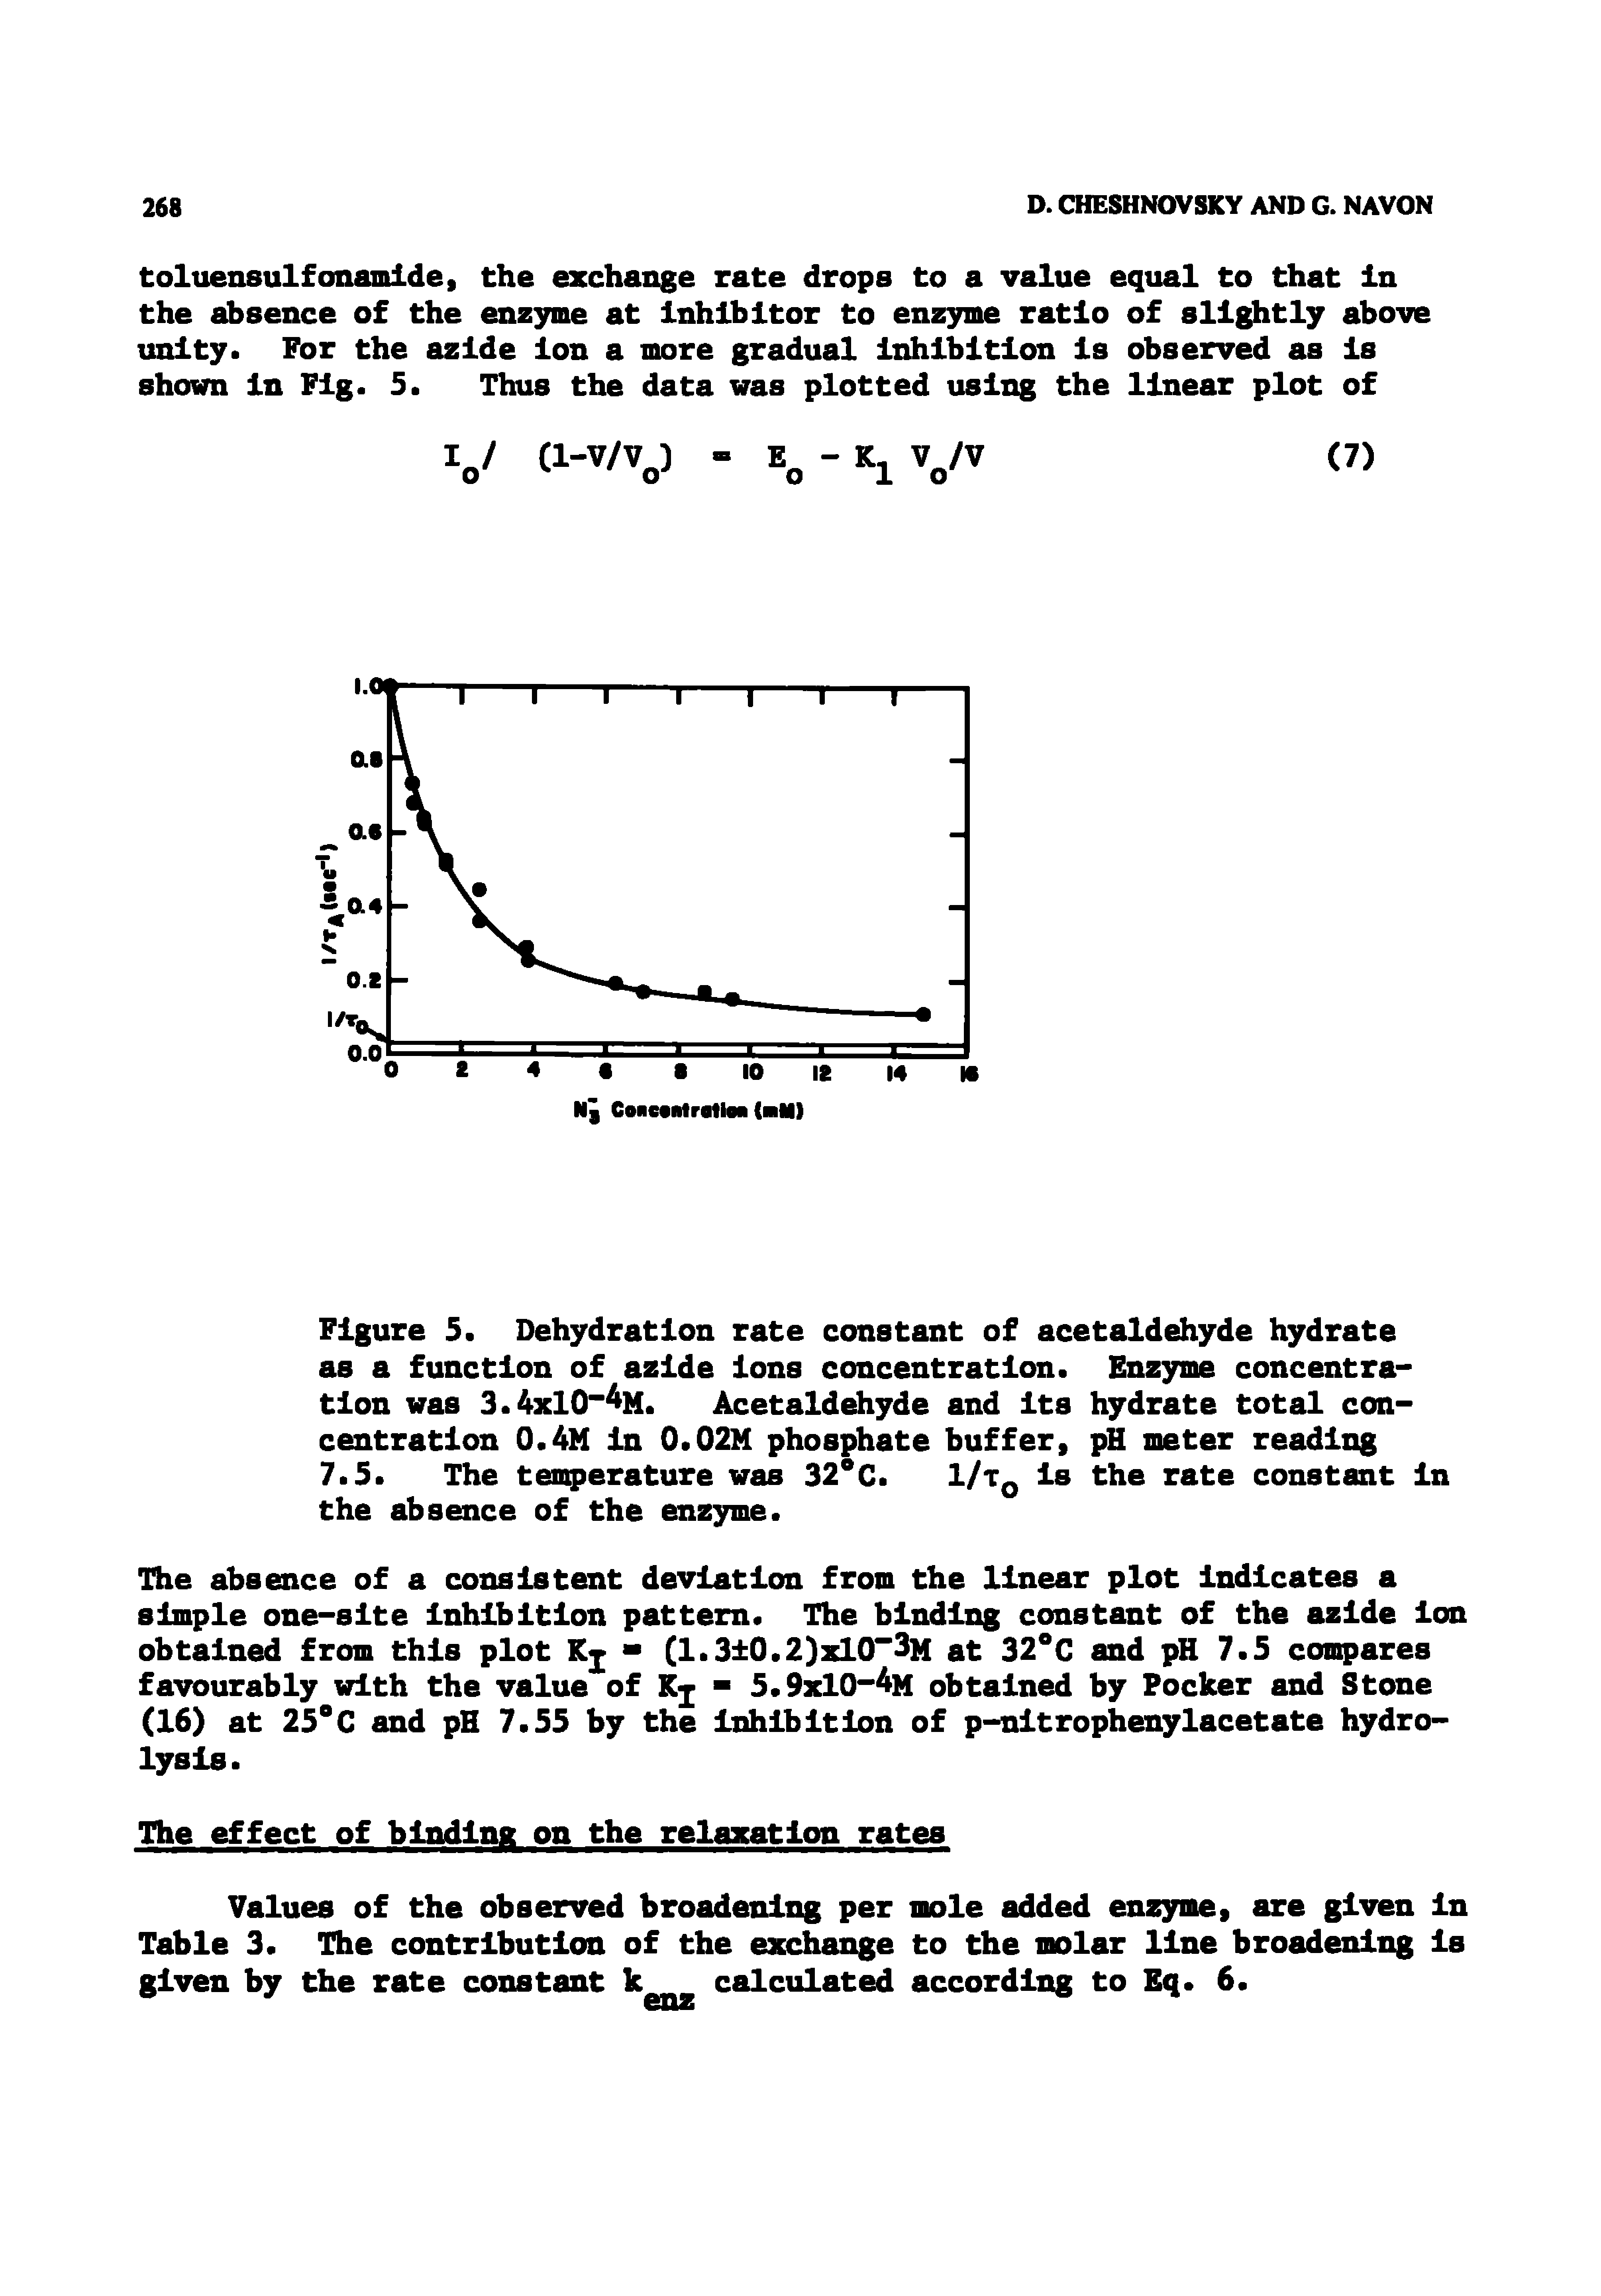 Figure 5. Dehydration rate constant of acetaldehyde hydrate as a function of azide Ions concentration. Enzyme concentration was 3.4z10 4m. Acetaldehyde and Its hydrate total concentration 0.4M In 0.02M phosphate buffer, meter reading 7.5. The tenqierature was 32 C. I/Tq Is the rate constant In the absence of the enzyme.